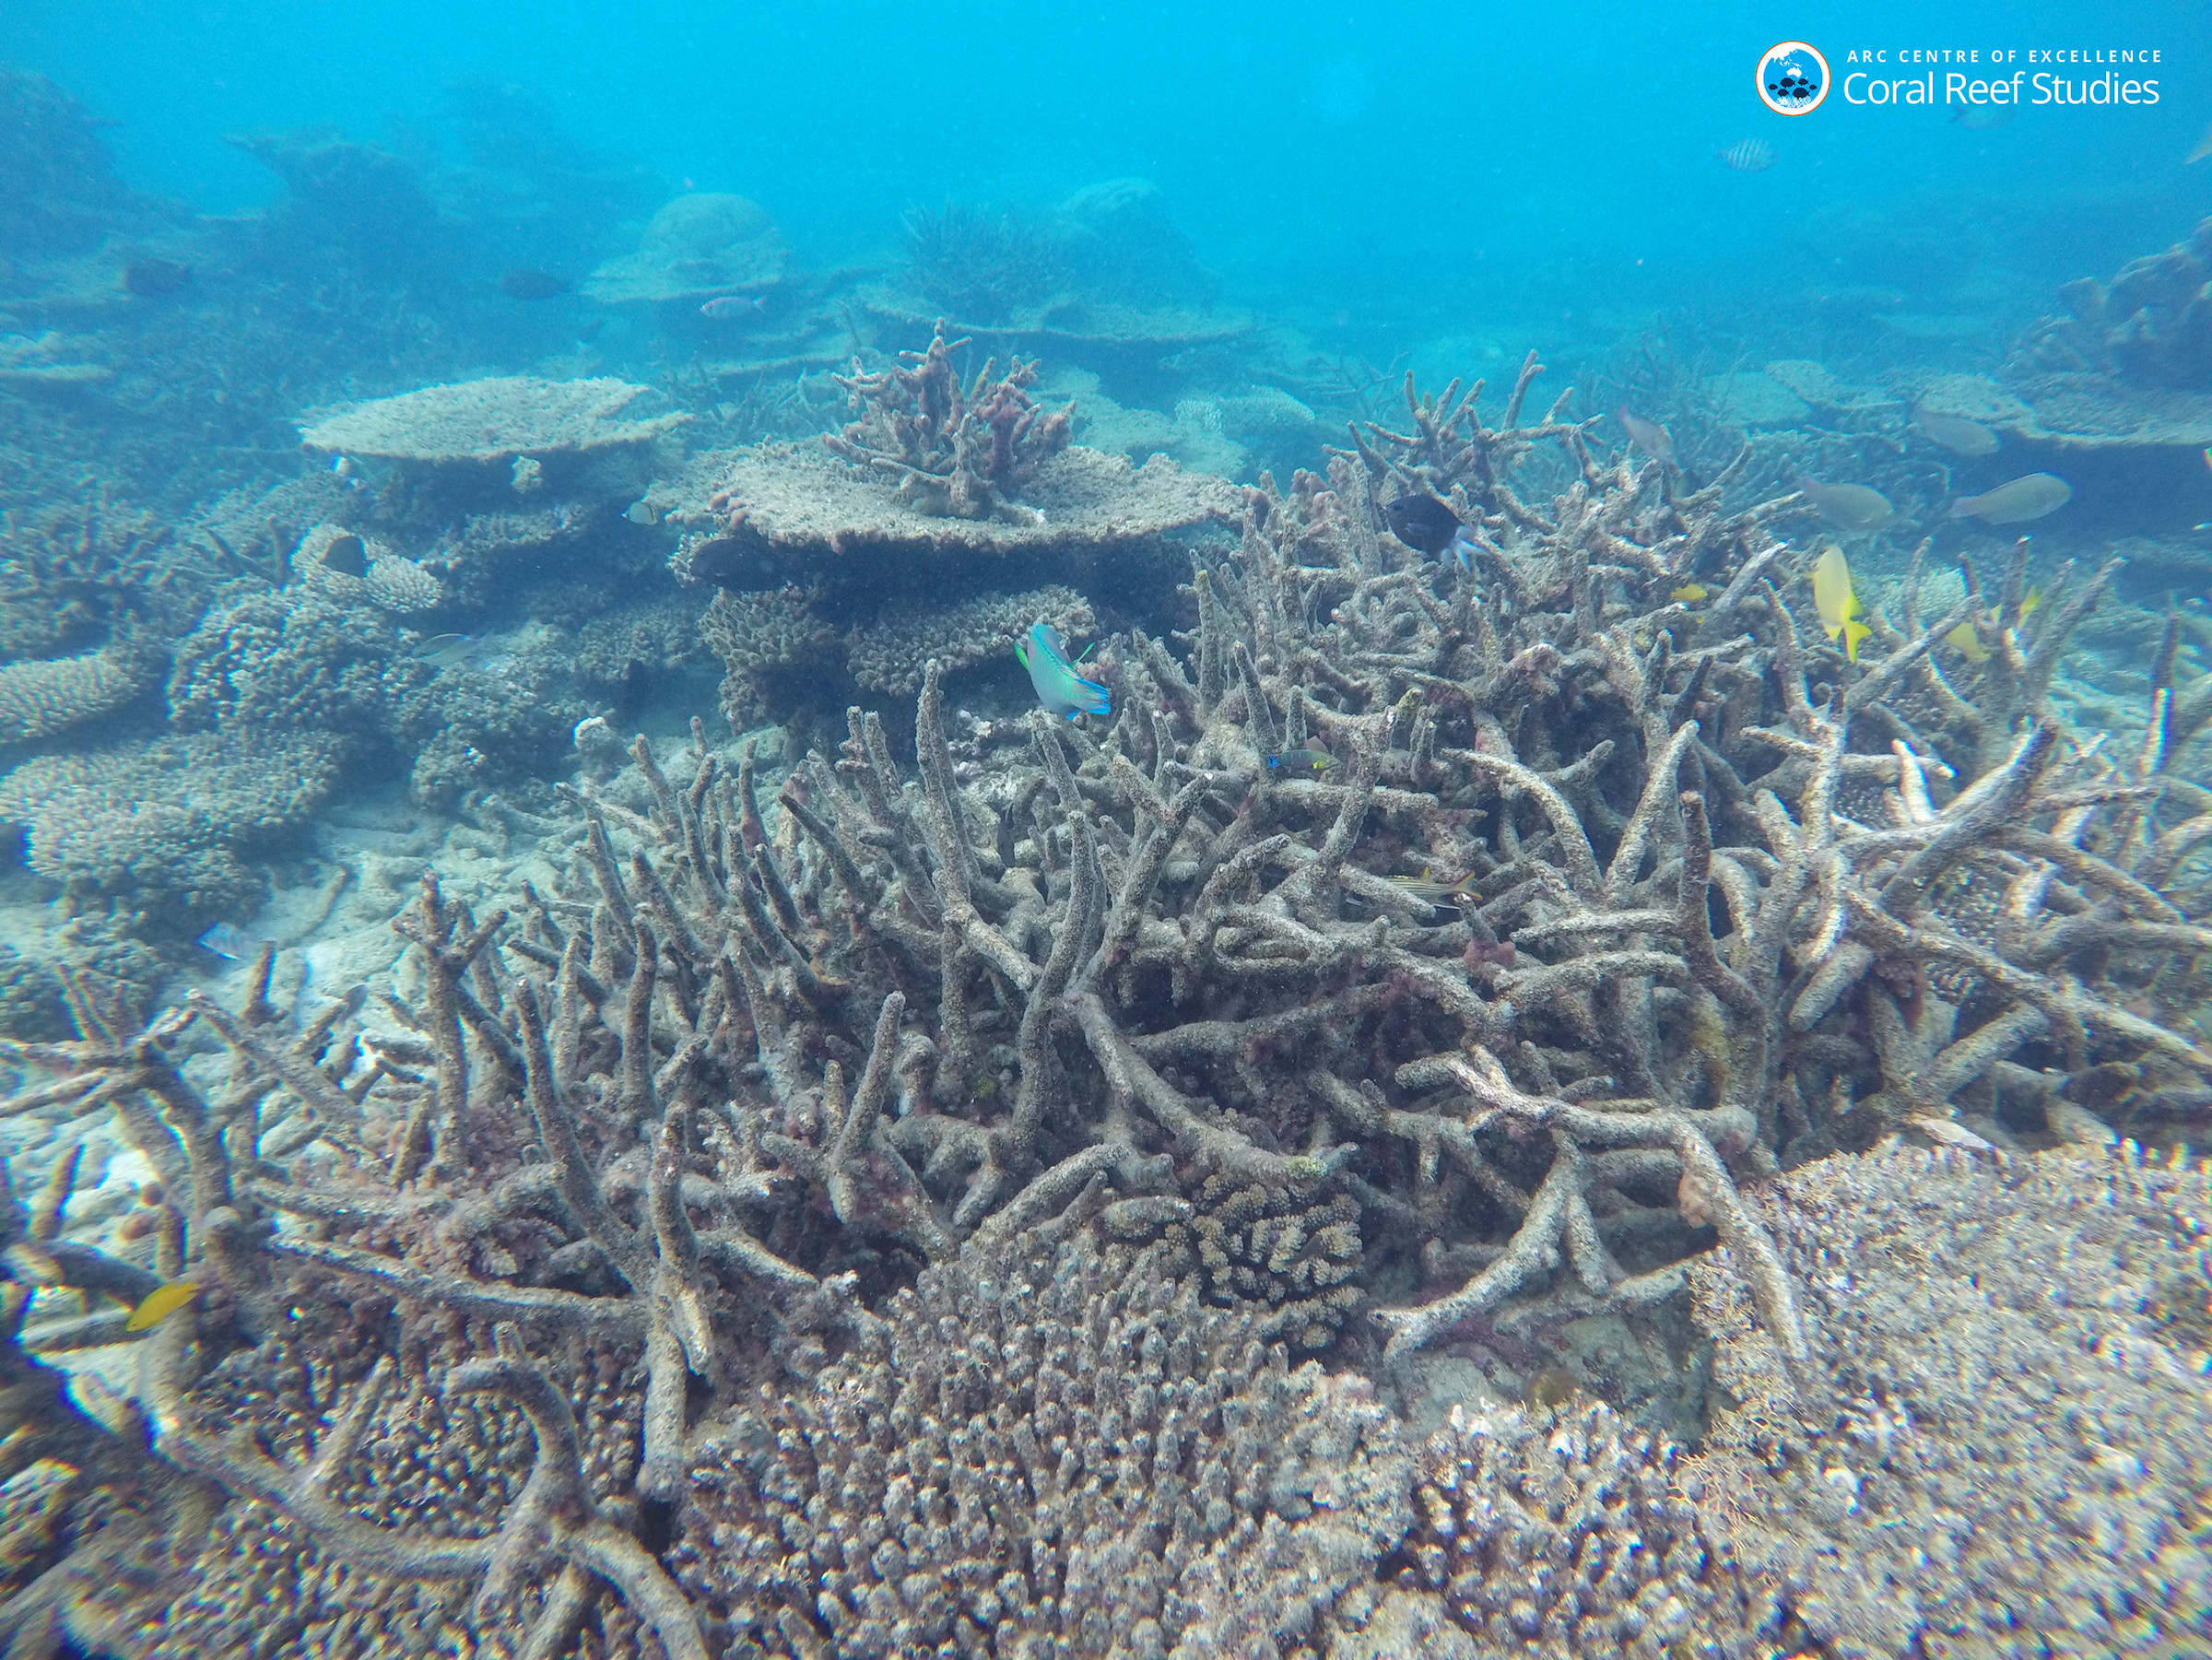 Dead staghorn coral killed by bleaching on the northern Great Barrier Reef, November 2016.